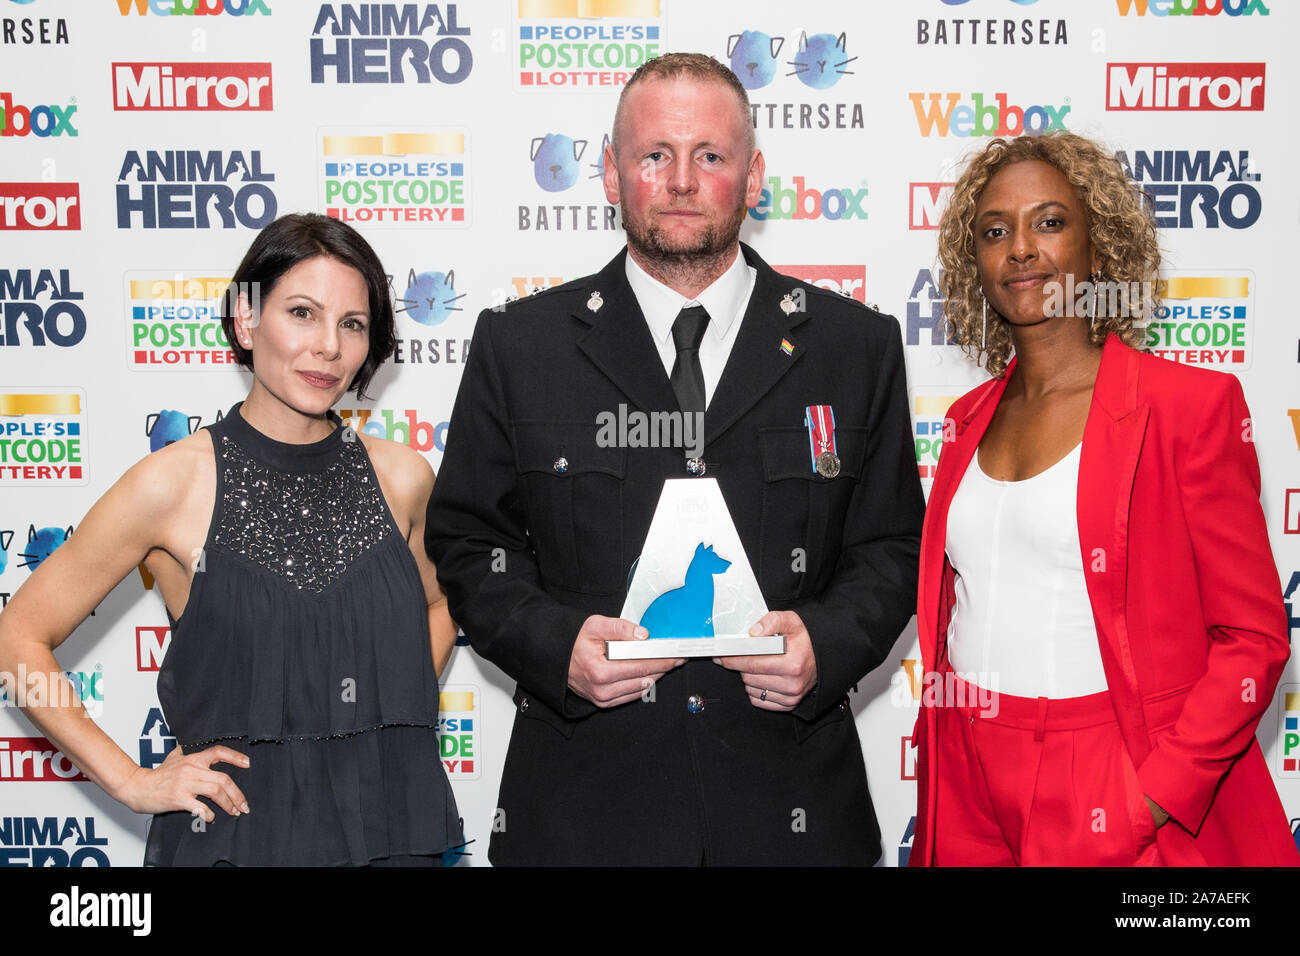 Red carpet arrivals for The Mirror Animal Hero Awards 2019, in partnership with People's Postcode Lottery and Webbox at Grosvenor House Hotel Featuring: Lucrezia Milarini, Special Recognition Winner Inspector Kevin Kelly, Gillian Burke Where: London, United Kingdom When: 30 Sep 2019 Credit: Phil Lewis/WENN.com Stock Photo